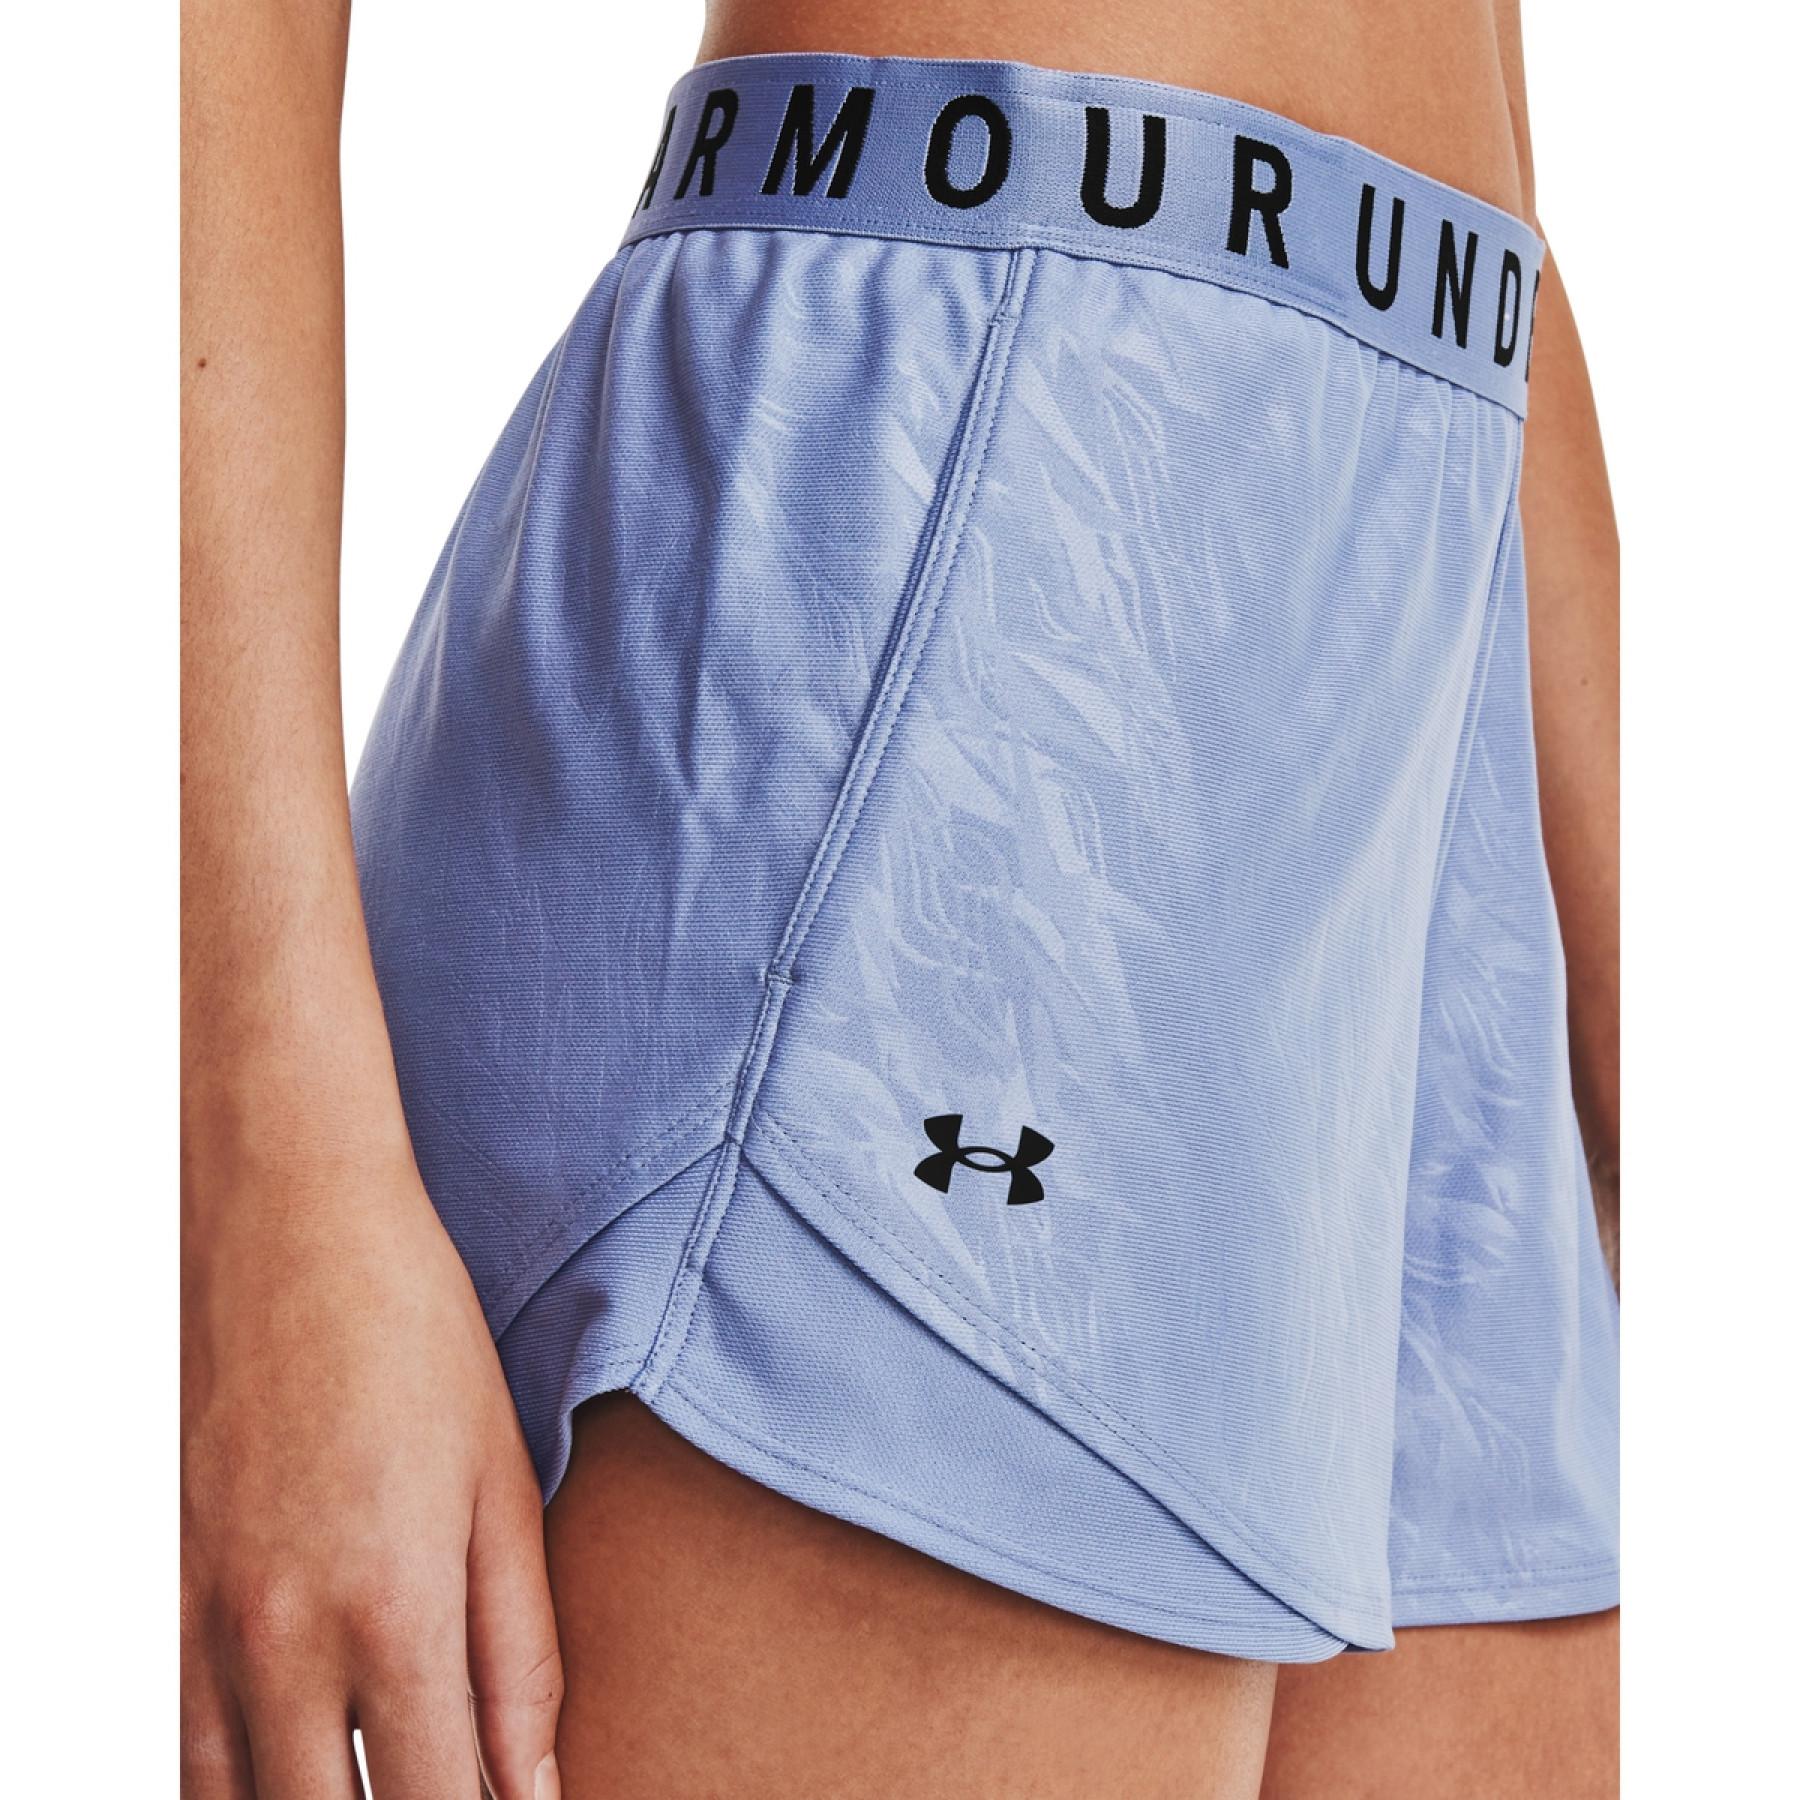 Women's shorts Under Armour play up 3.0 emboss